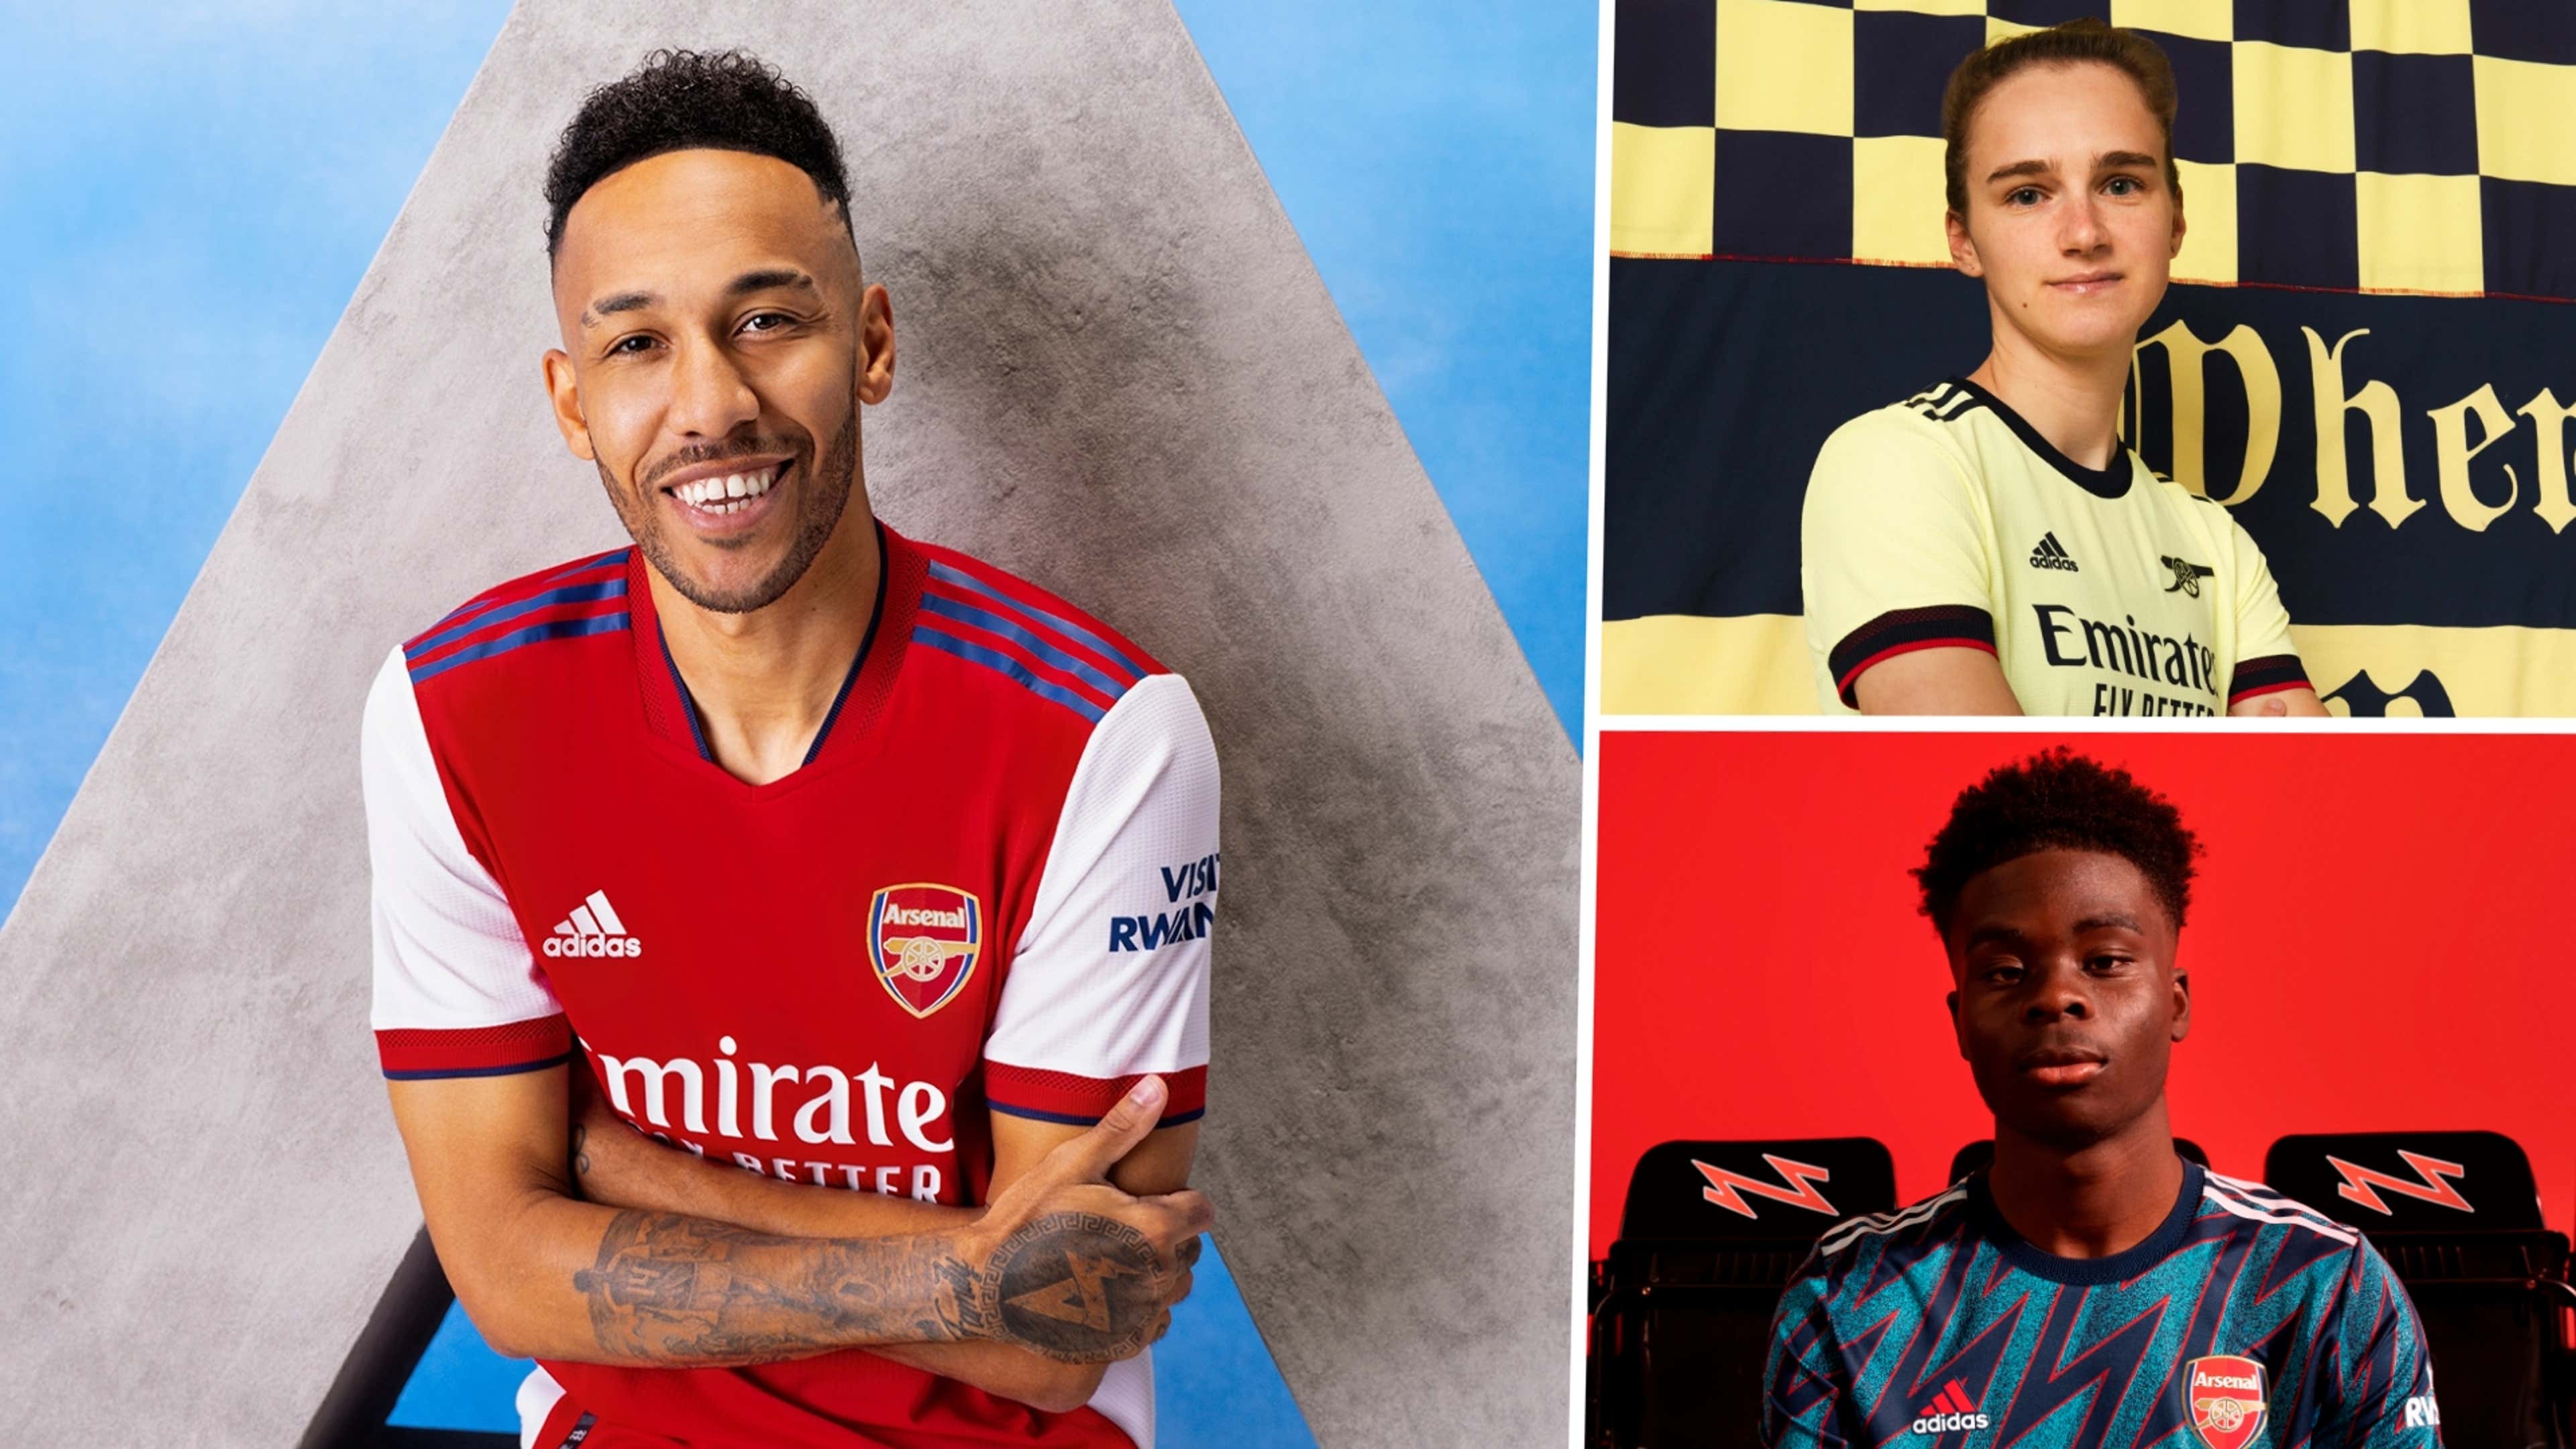 Arsenal 2021-22 kit: New home and away jersey styles & release dates